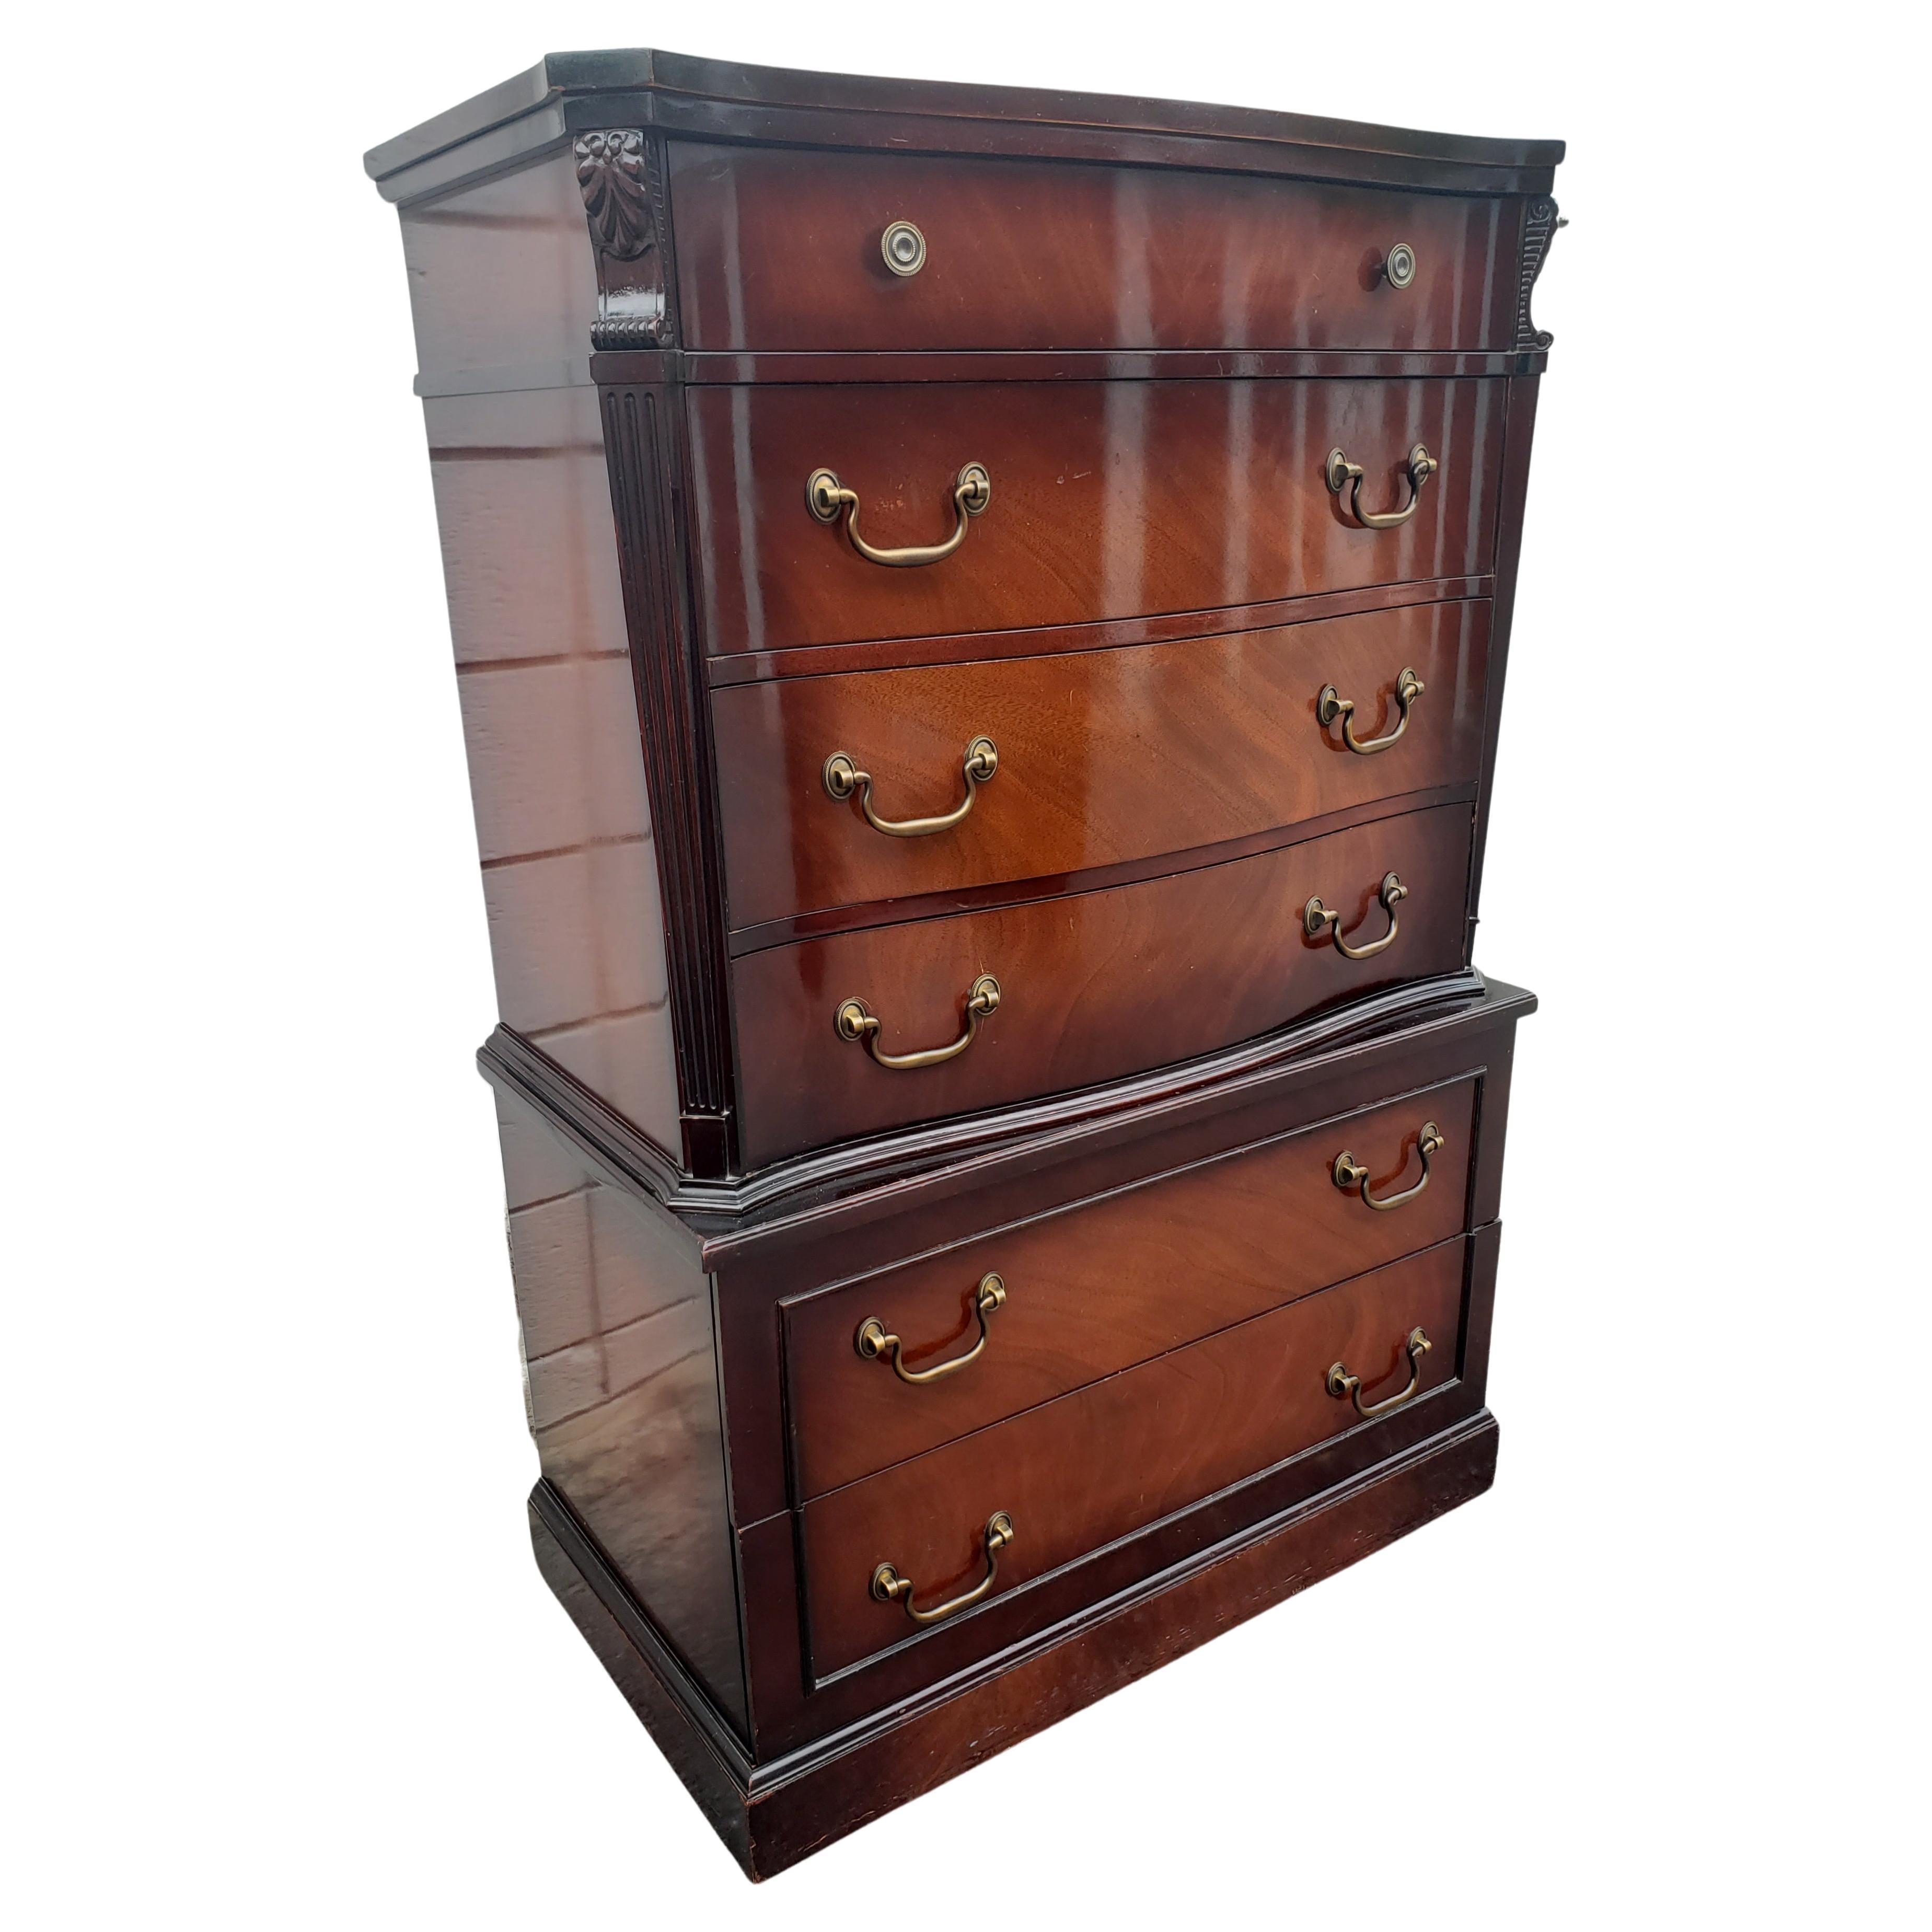 Very rare 1940s Carlton House mahogany chest on chest of drawers. Rock solid red mahogany wood. Fruitwood drawers. Heavy duty drop pull antique brass handles. Dovetailed drawers. Original finish. 

Measures 37